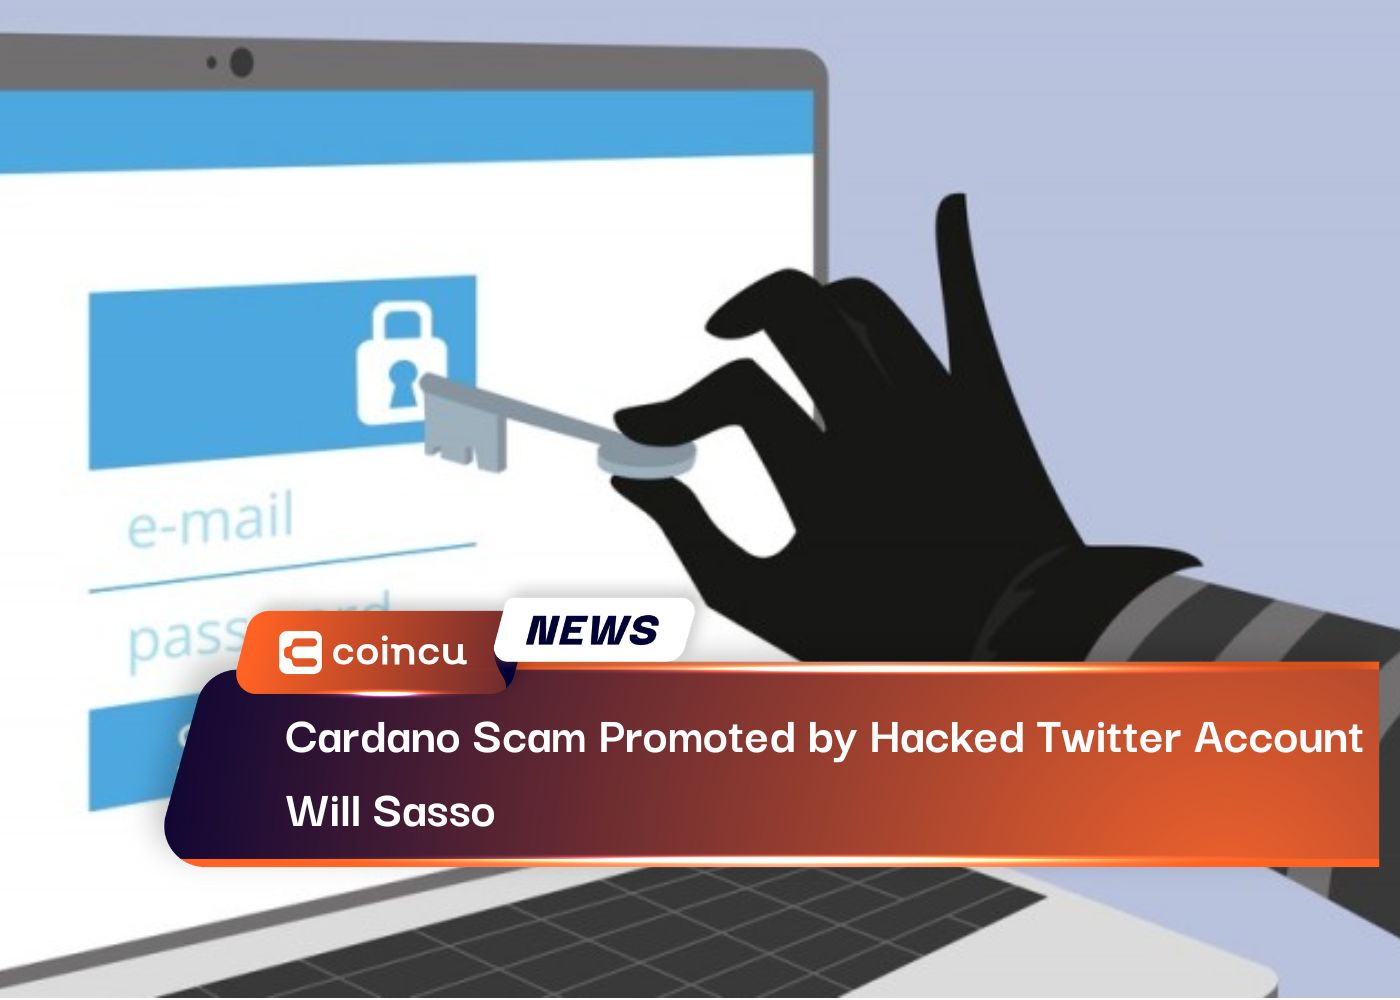 Cardano Scam Promoted by Hacked Twitter Account Will Sasso